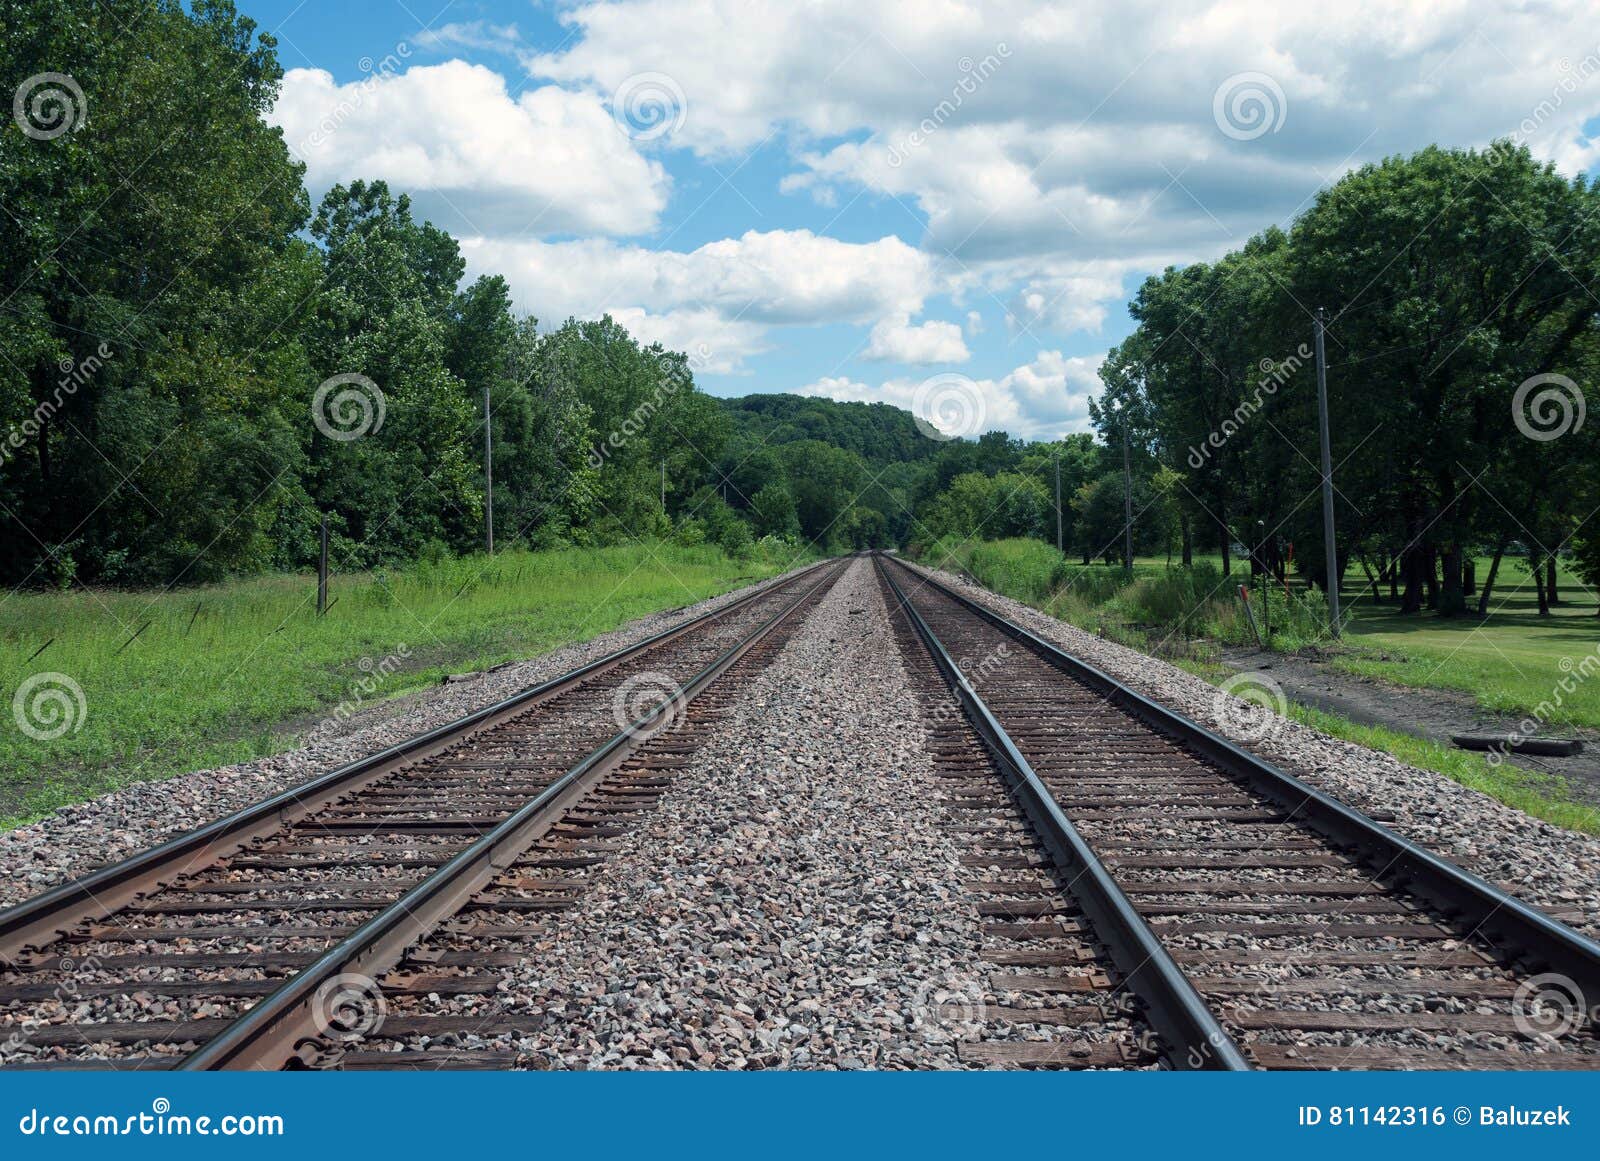 railroad tracks on the banks of the mississippi river